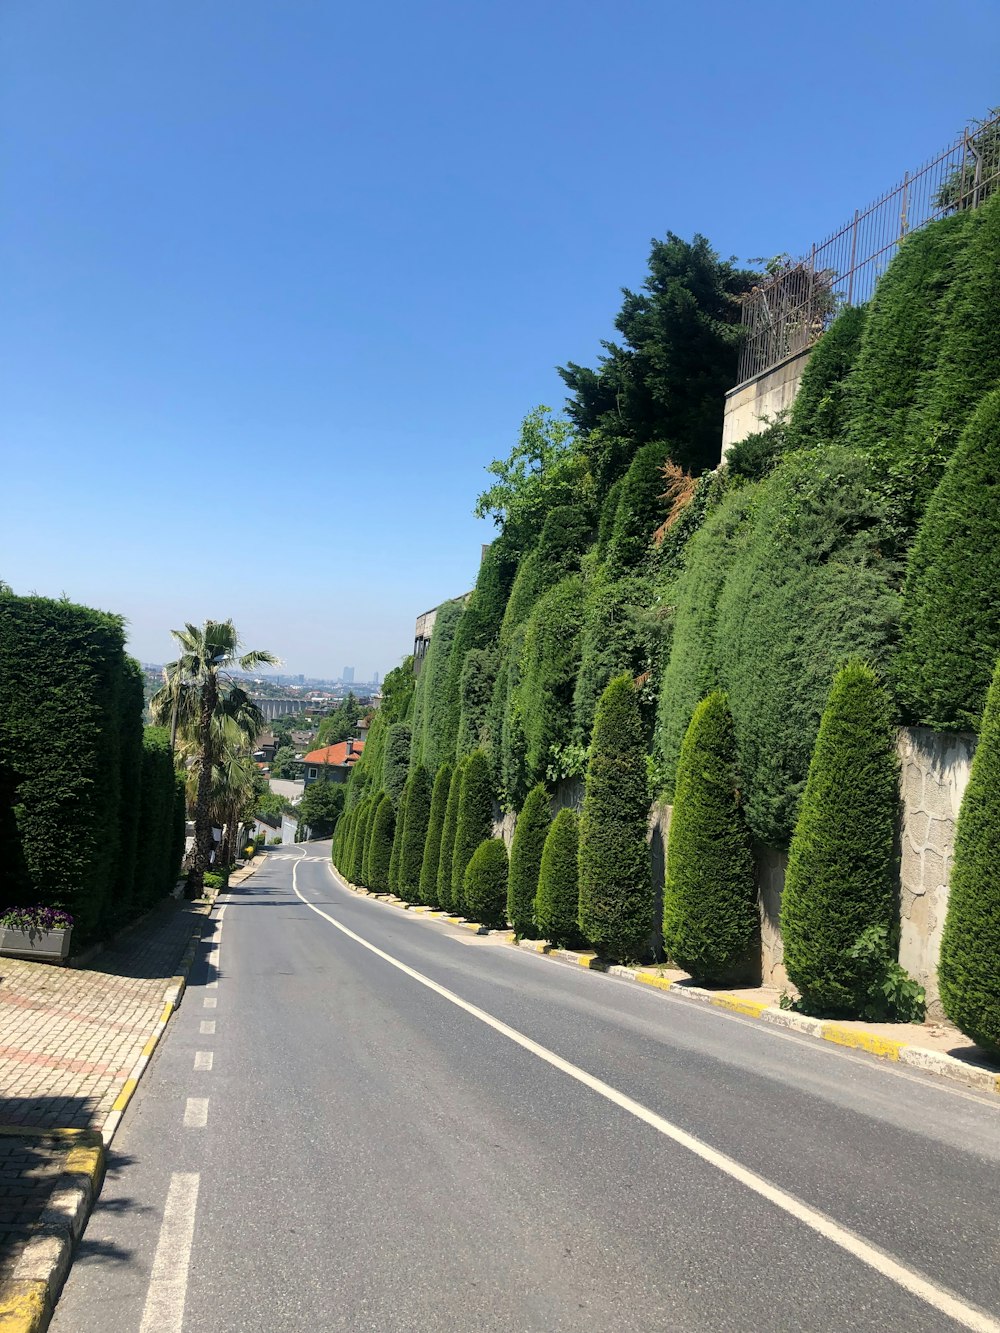 a street lined with trees and bushes on the side of a hill